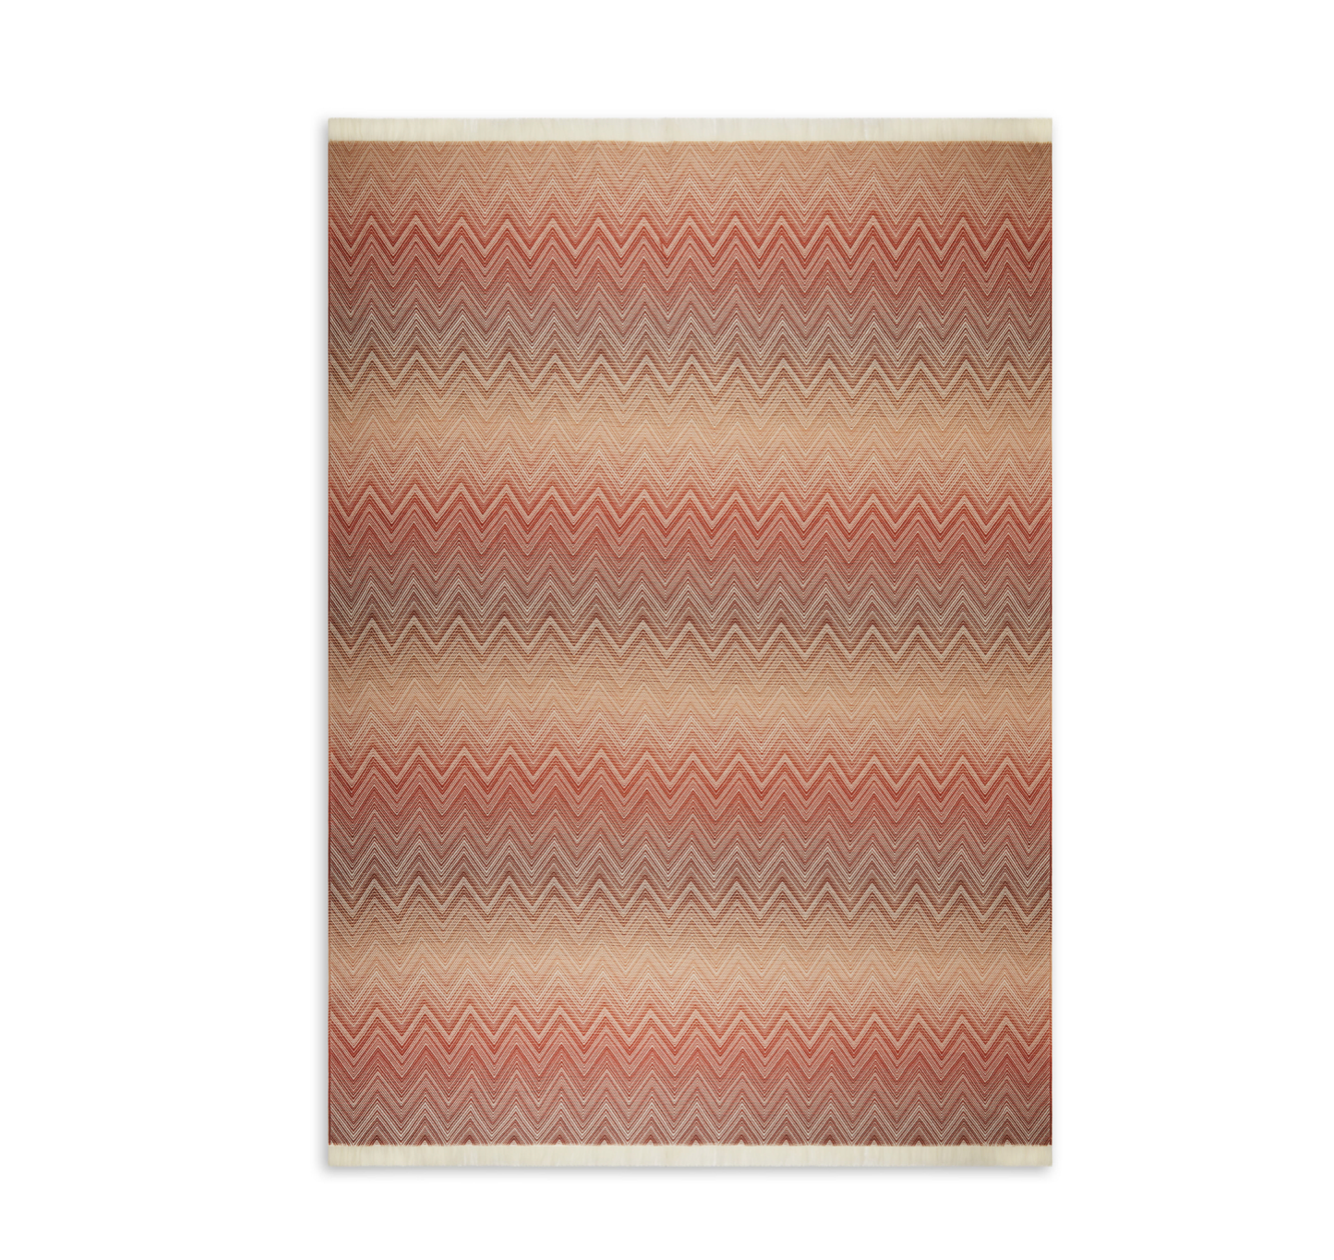 Timmy 641 wool throw by Missoni Home